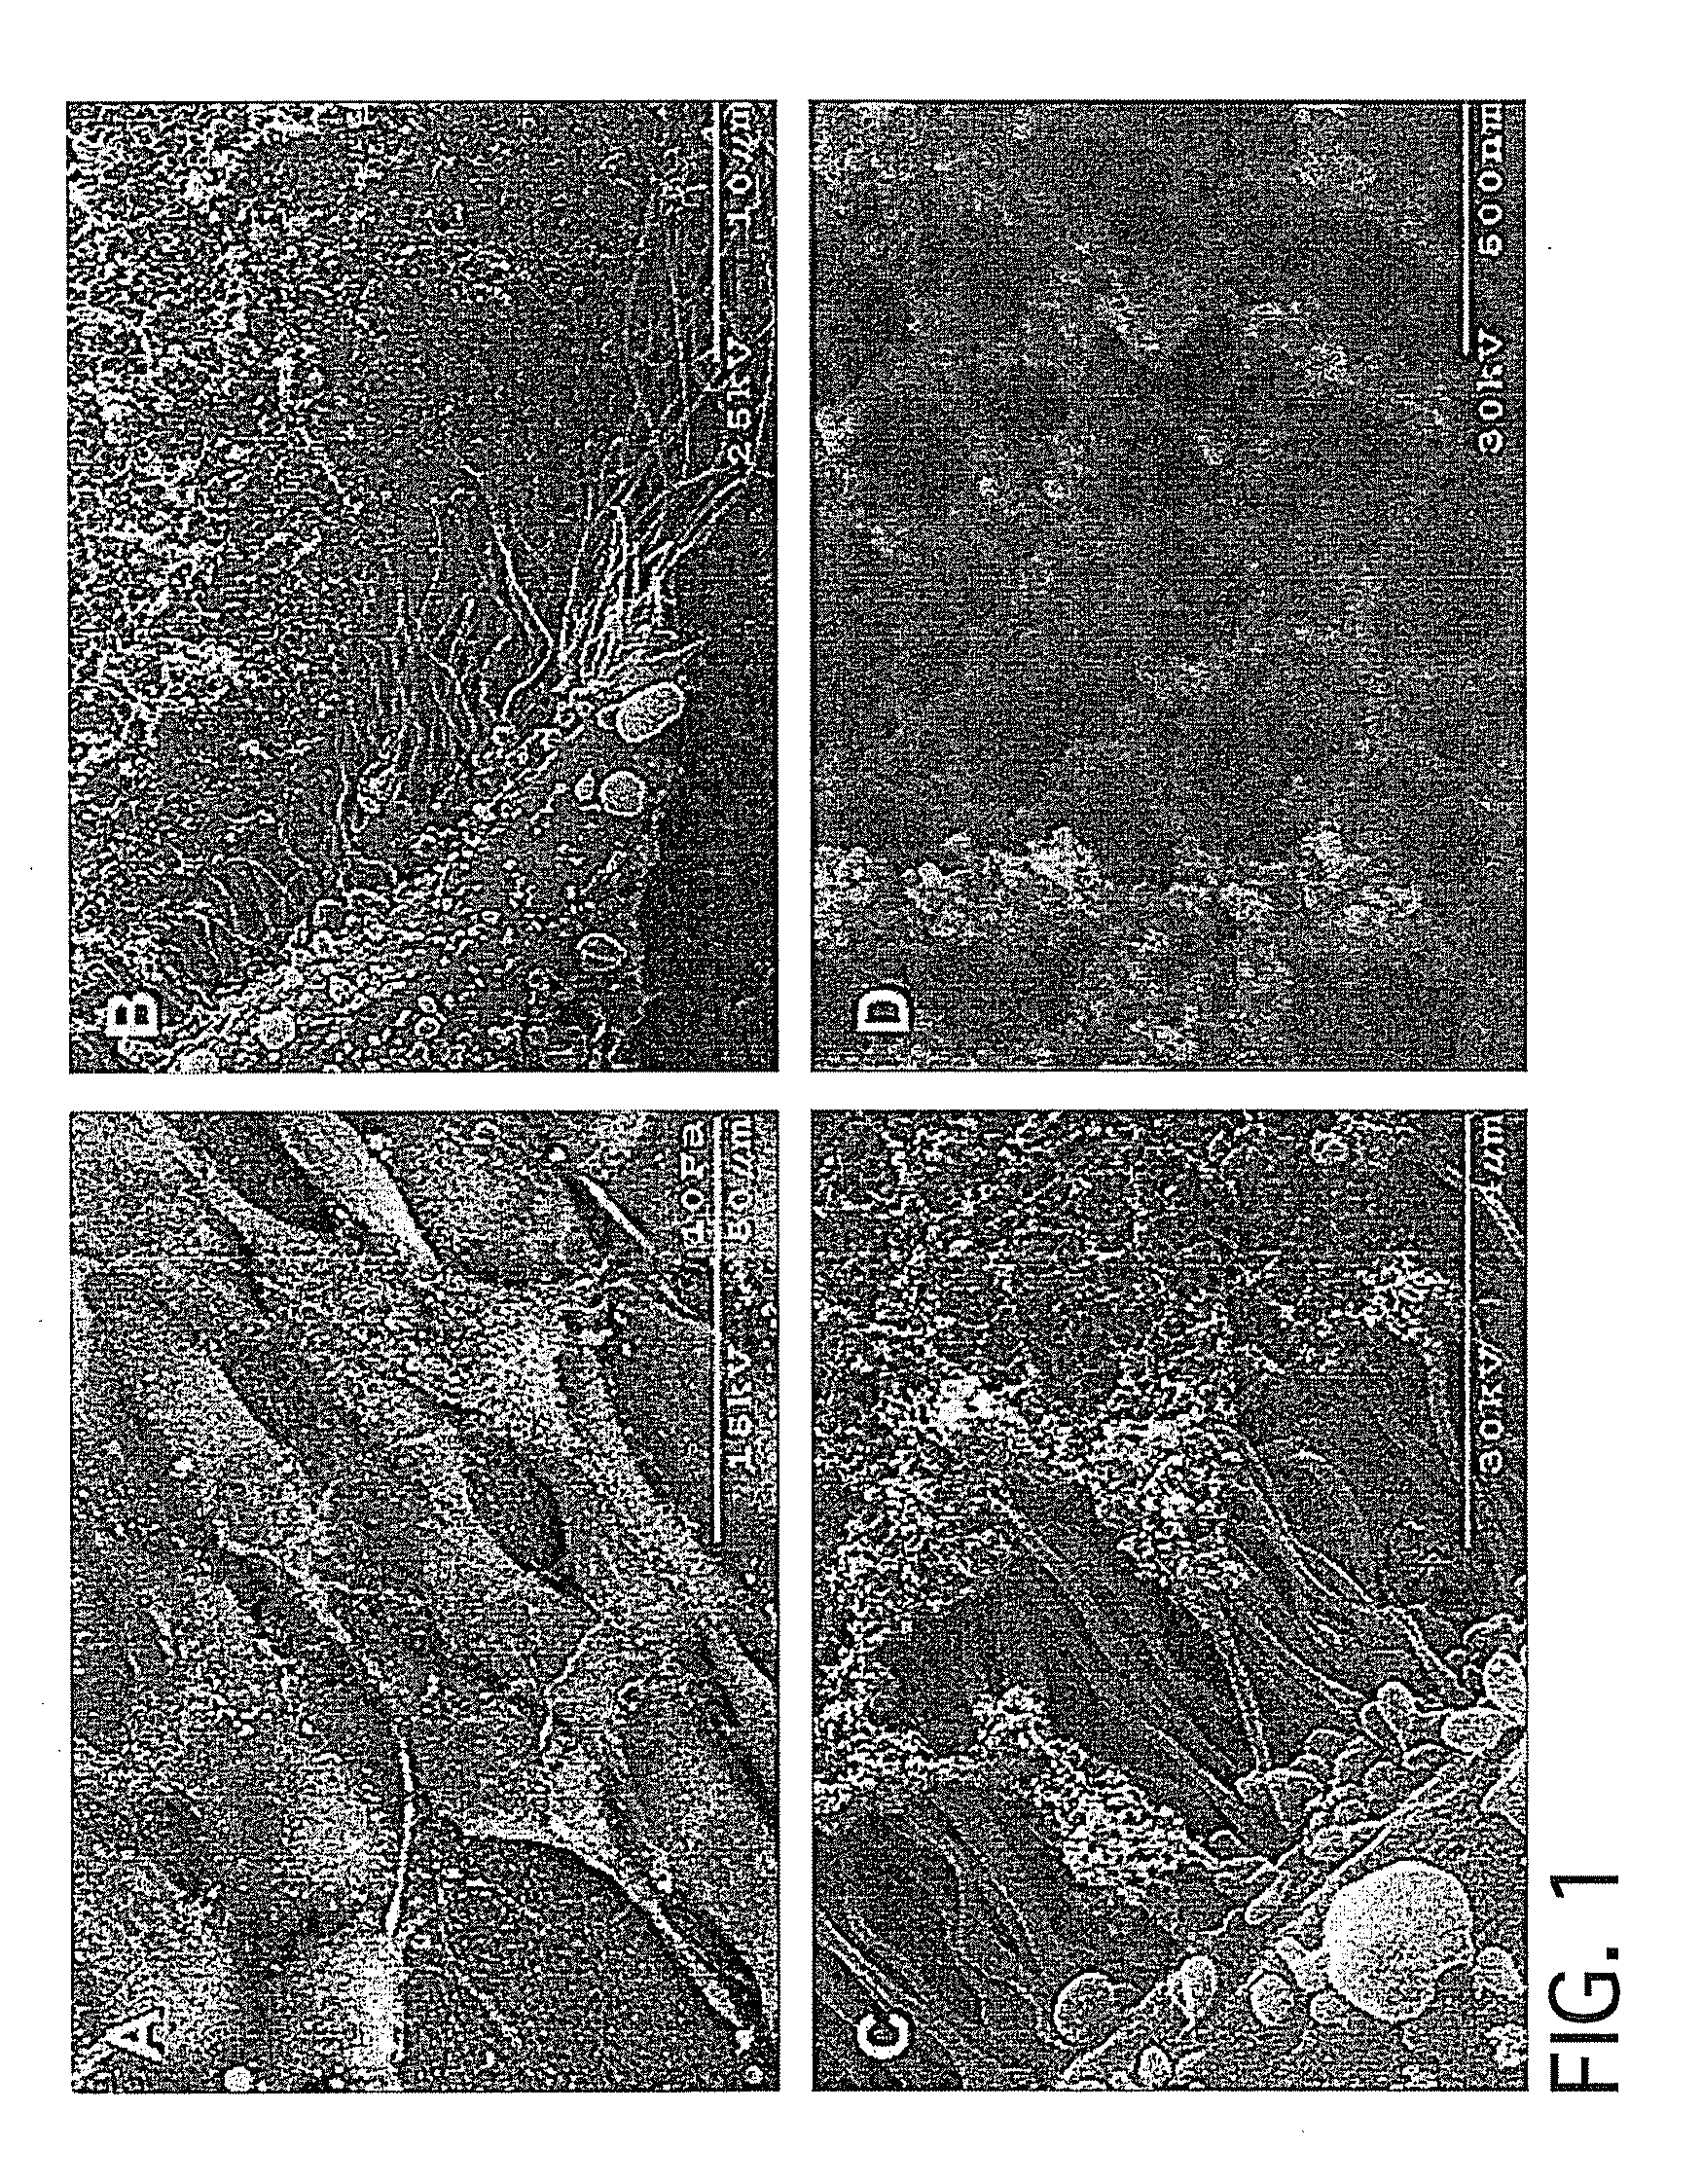 Method and apparatus for manufacturing plasma based plastics and bioplastics produced therefrom